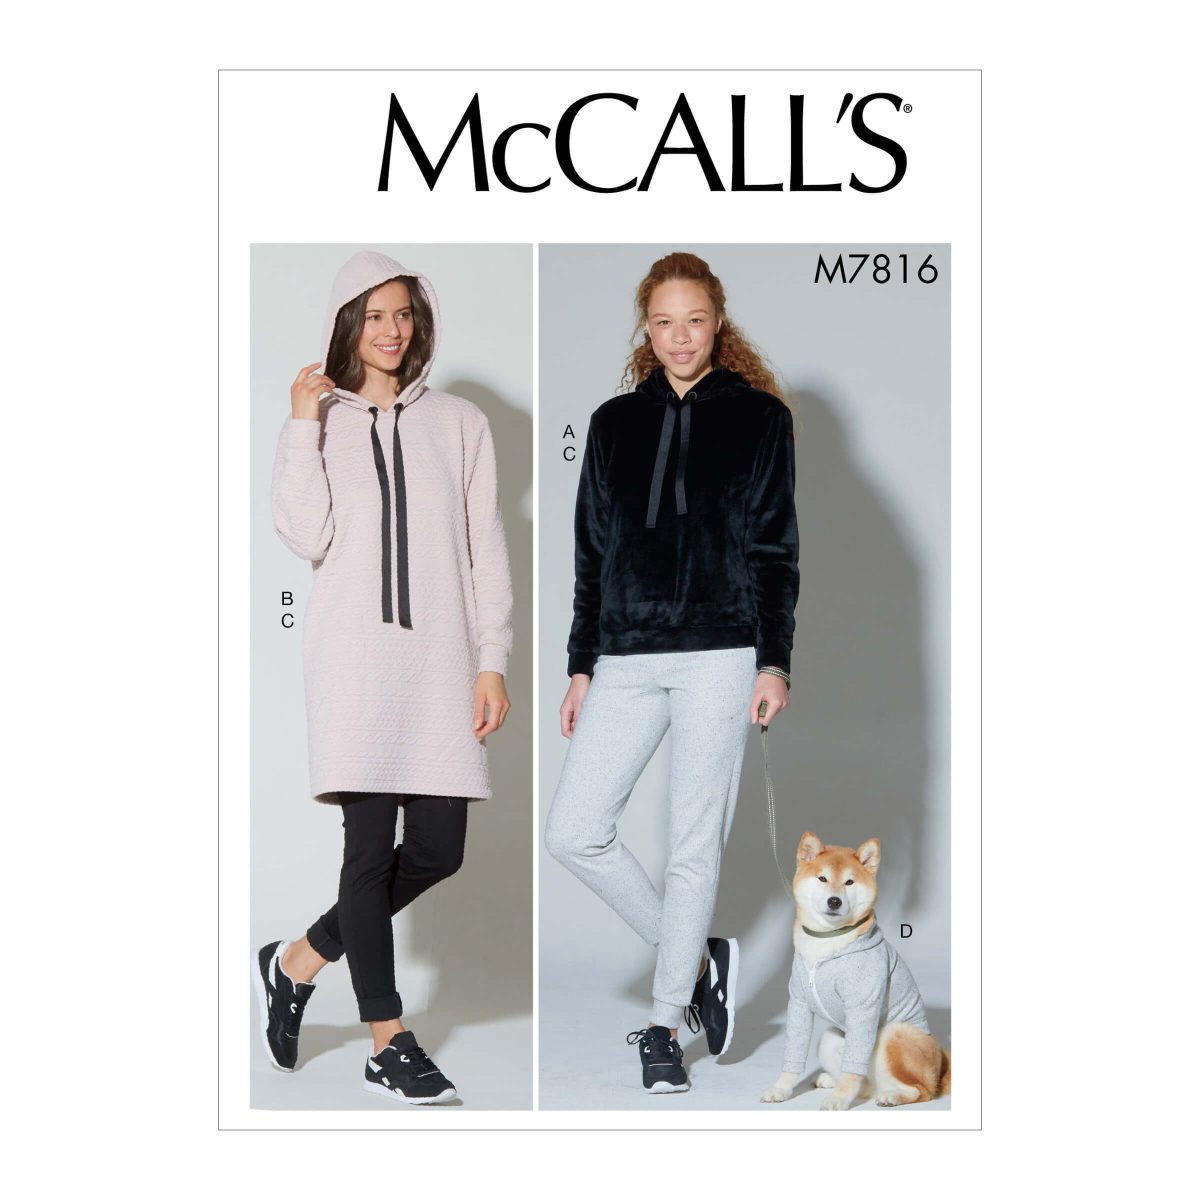 McCall's Sewing Pattern M7816 Misses' Top, Dress, Pants and Dog Coat